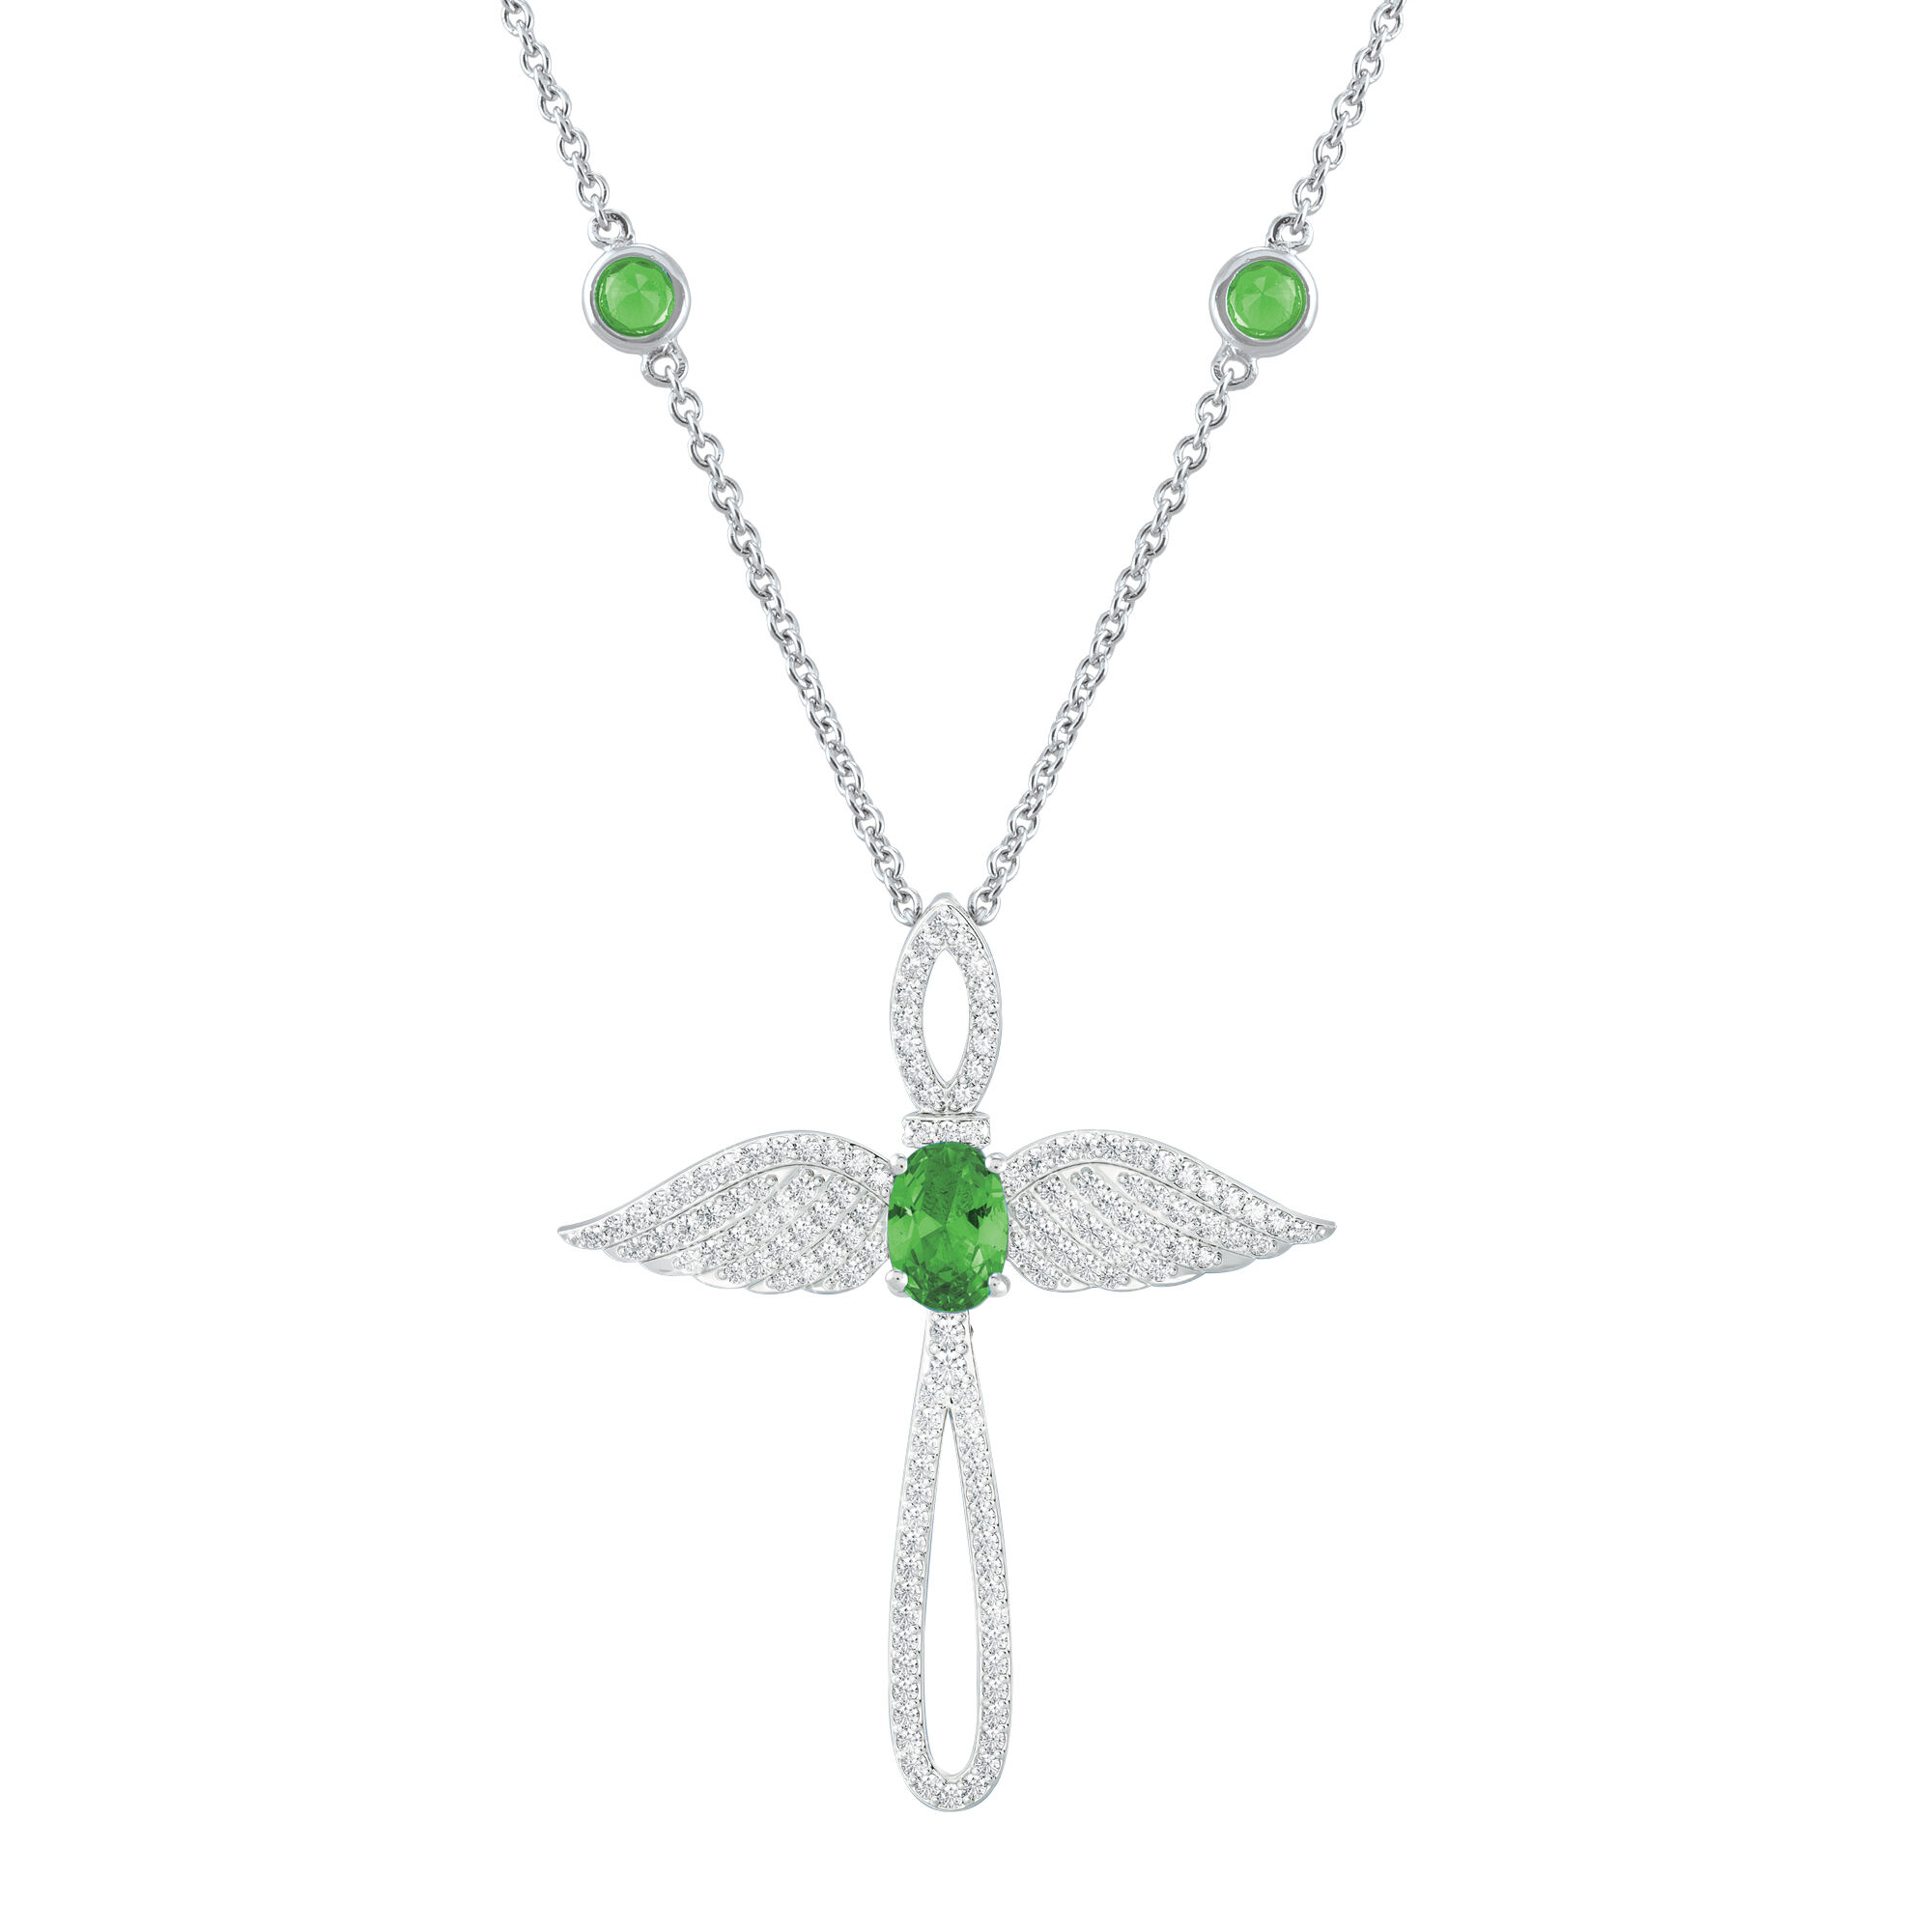 Touched by an Angel Birthstone Necklace 6842 0017 h august